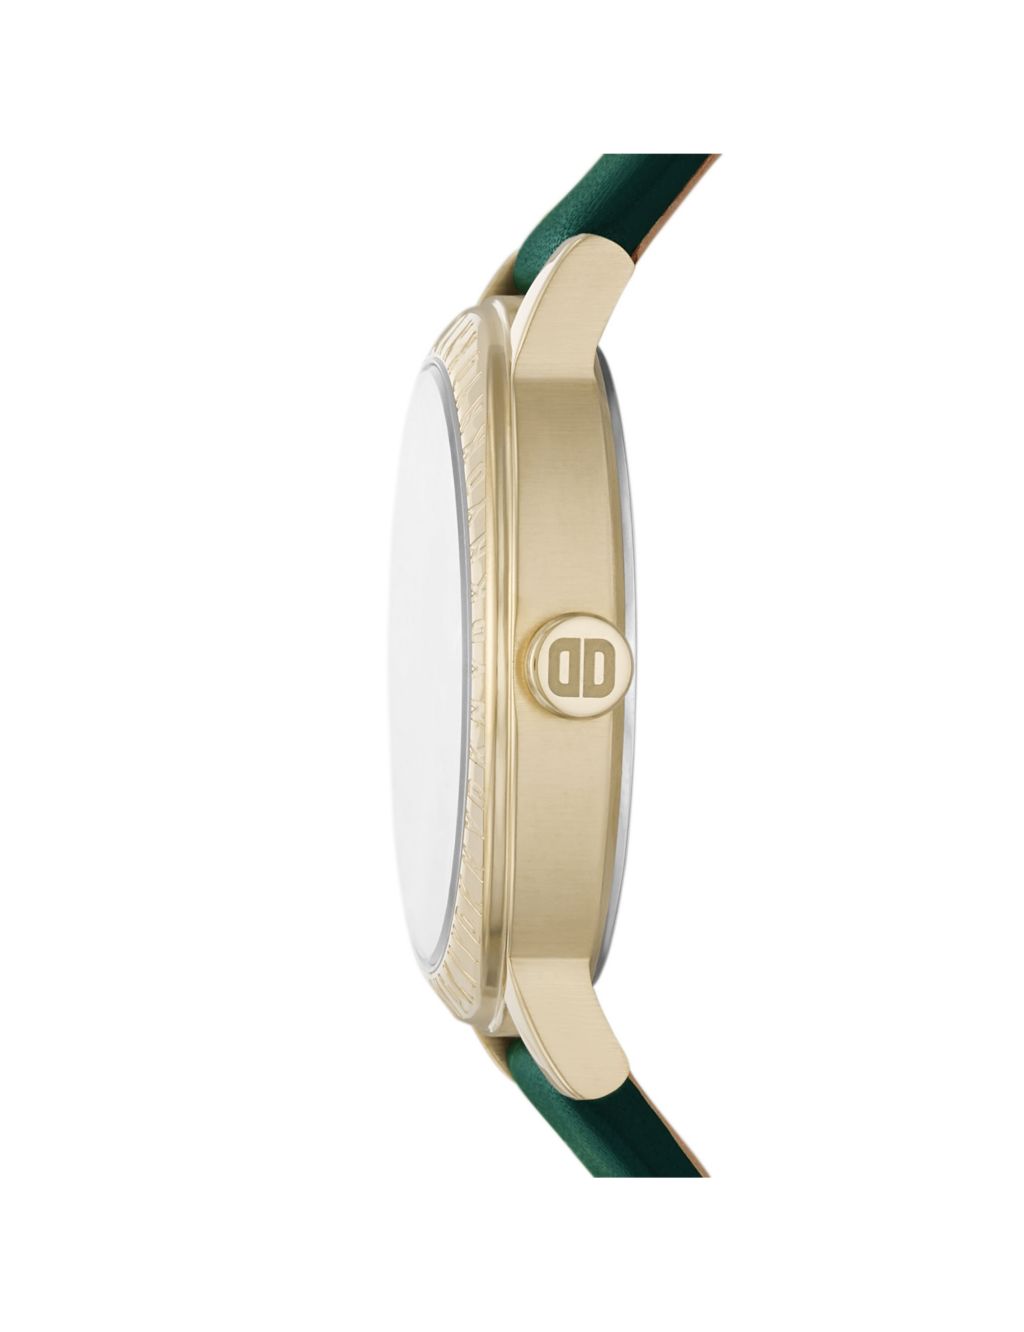 DKNY 7th Avenue Leather Watch image 3